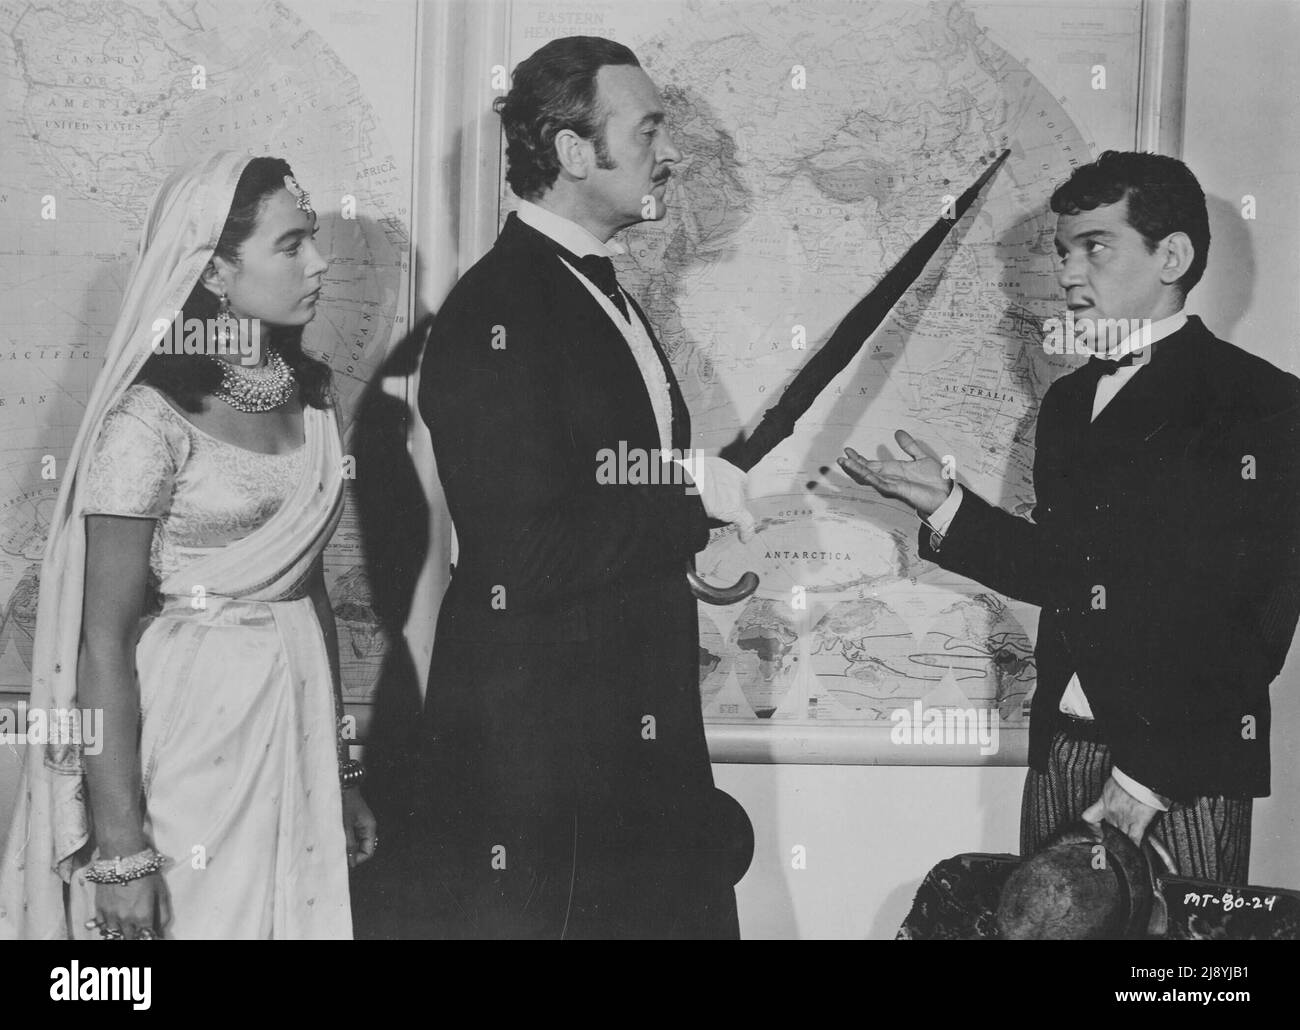 1950s world map Black and White Stock Photos & Images - Alamy